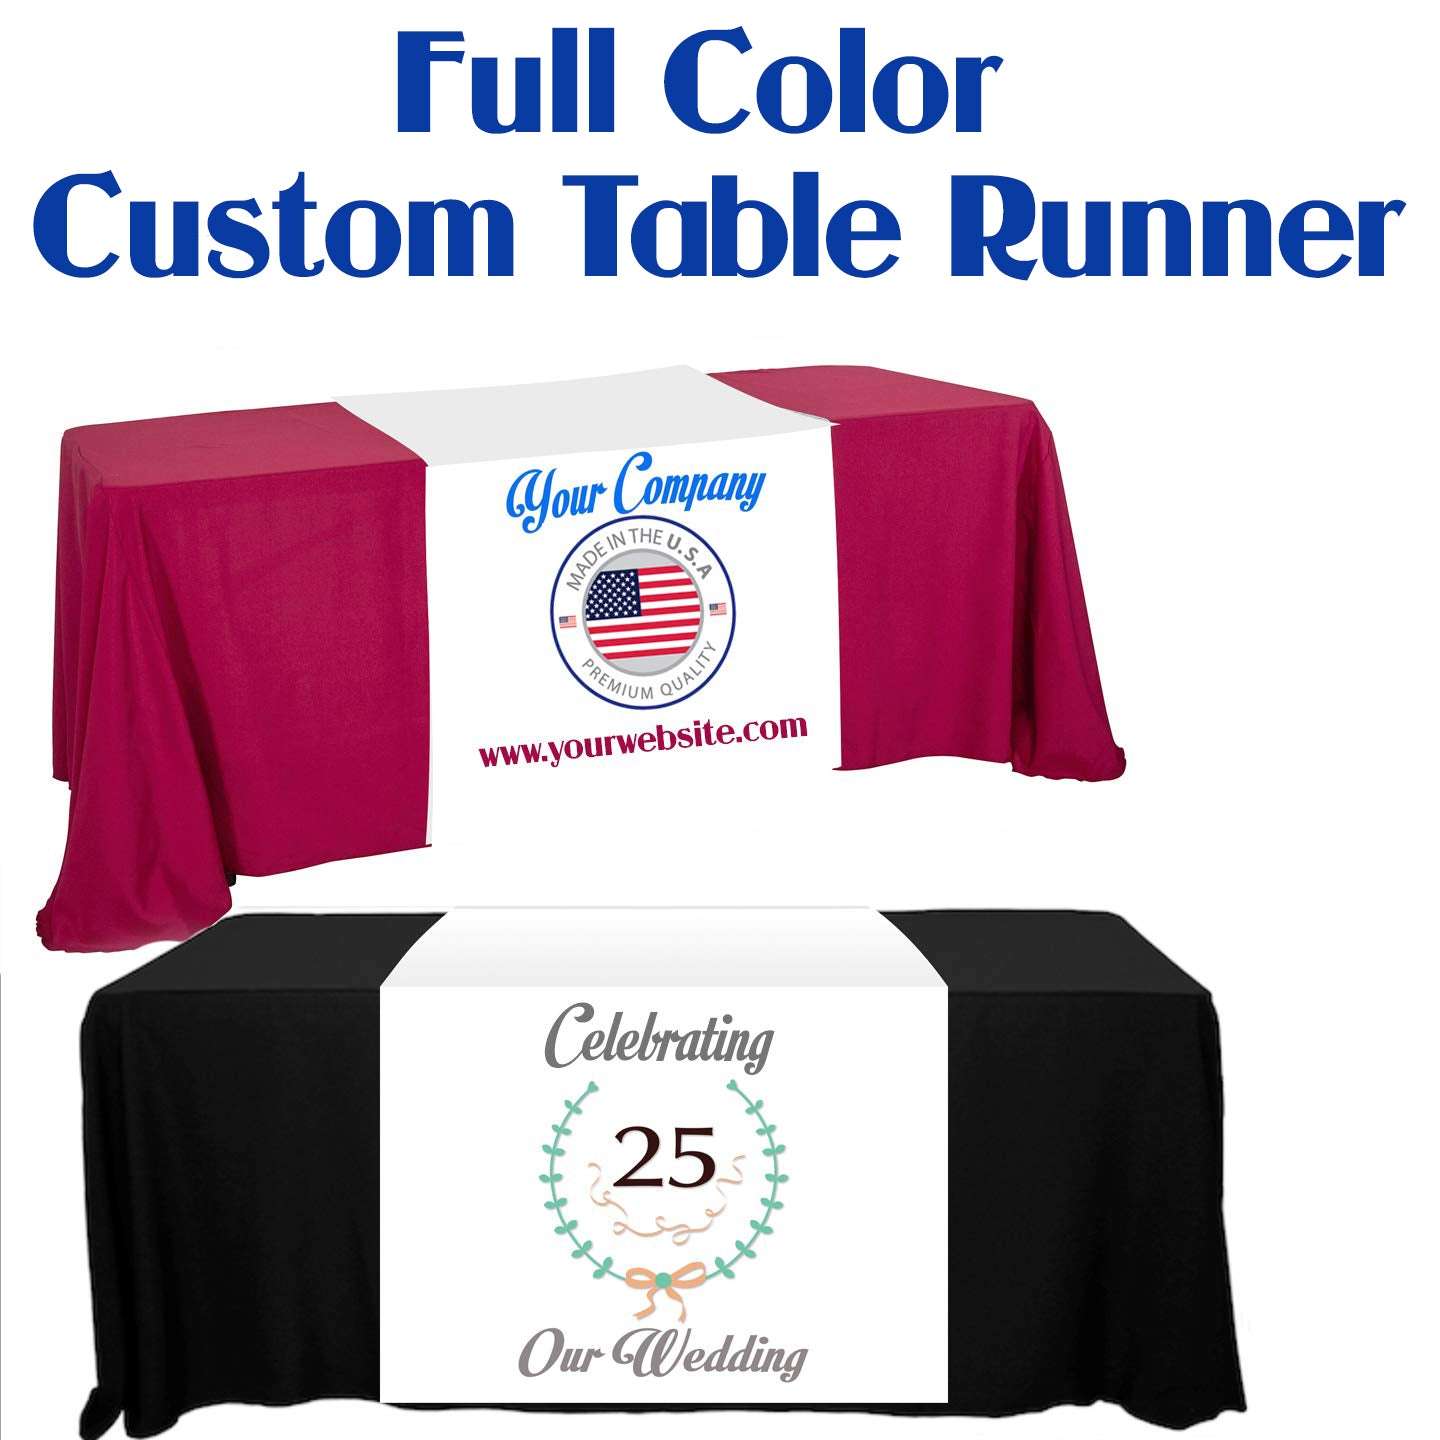 Customize Table Runner with your logo or Design From 24"x72" to  24"x90"  Great for trade show booths - Tremendos Dsigns